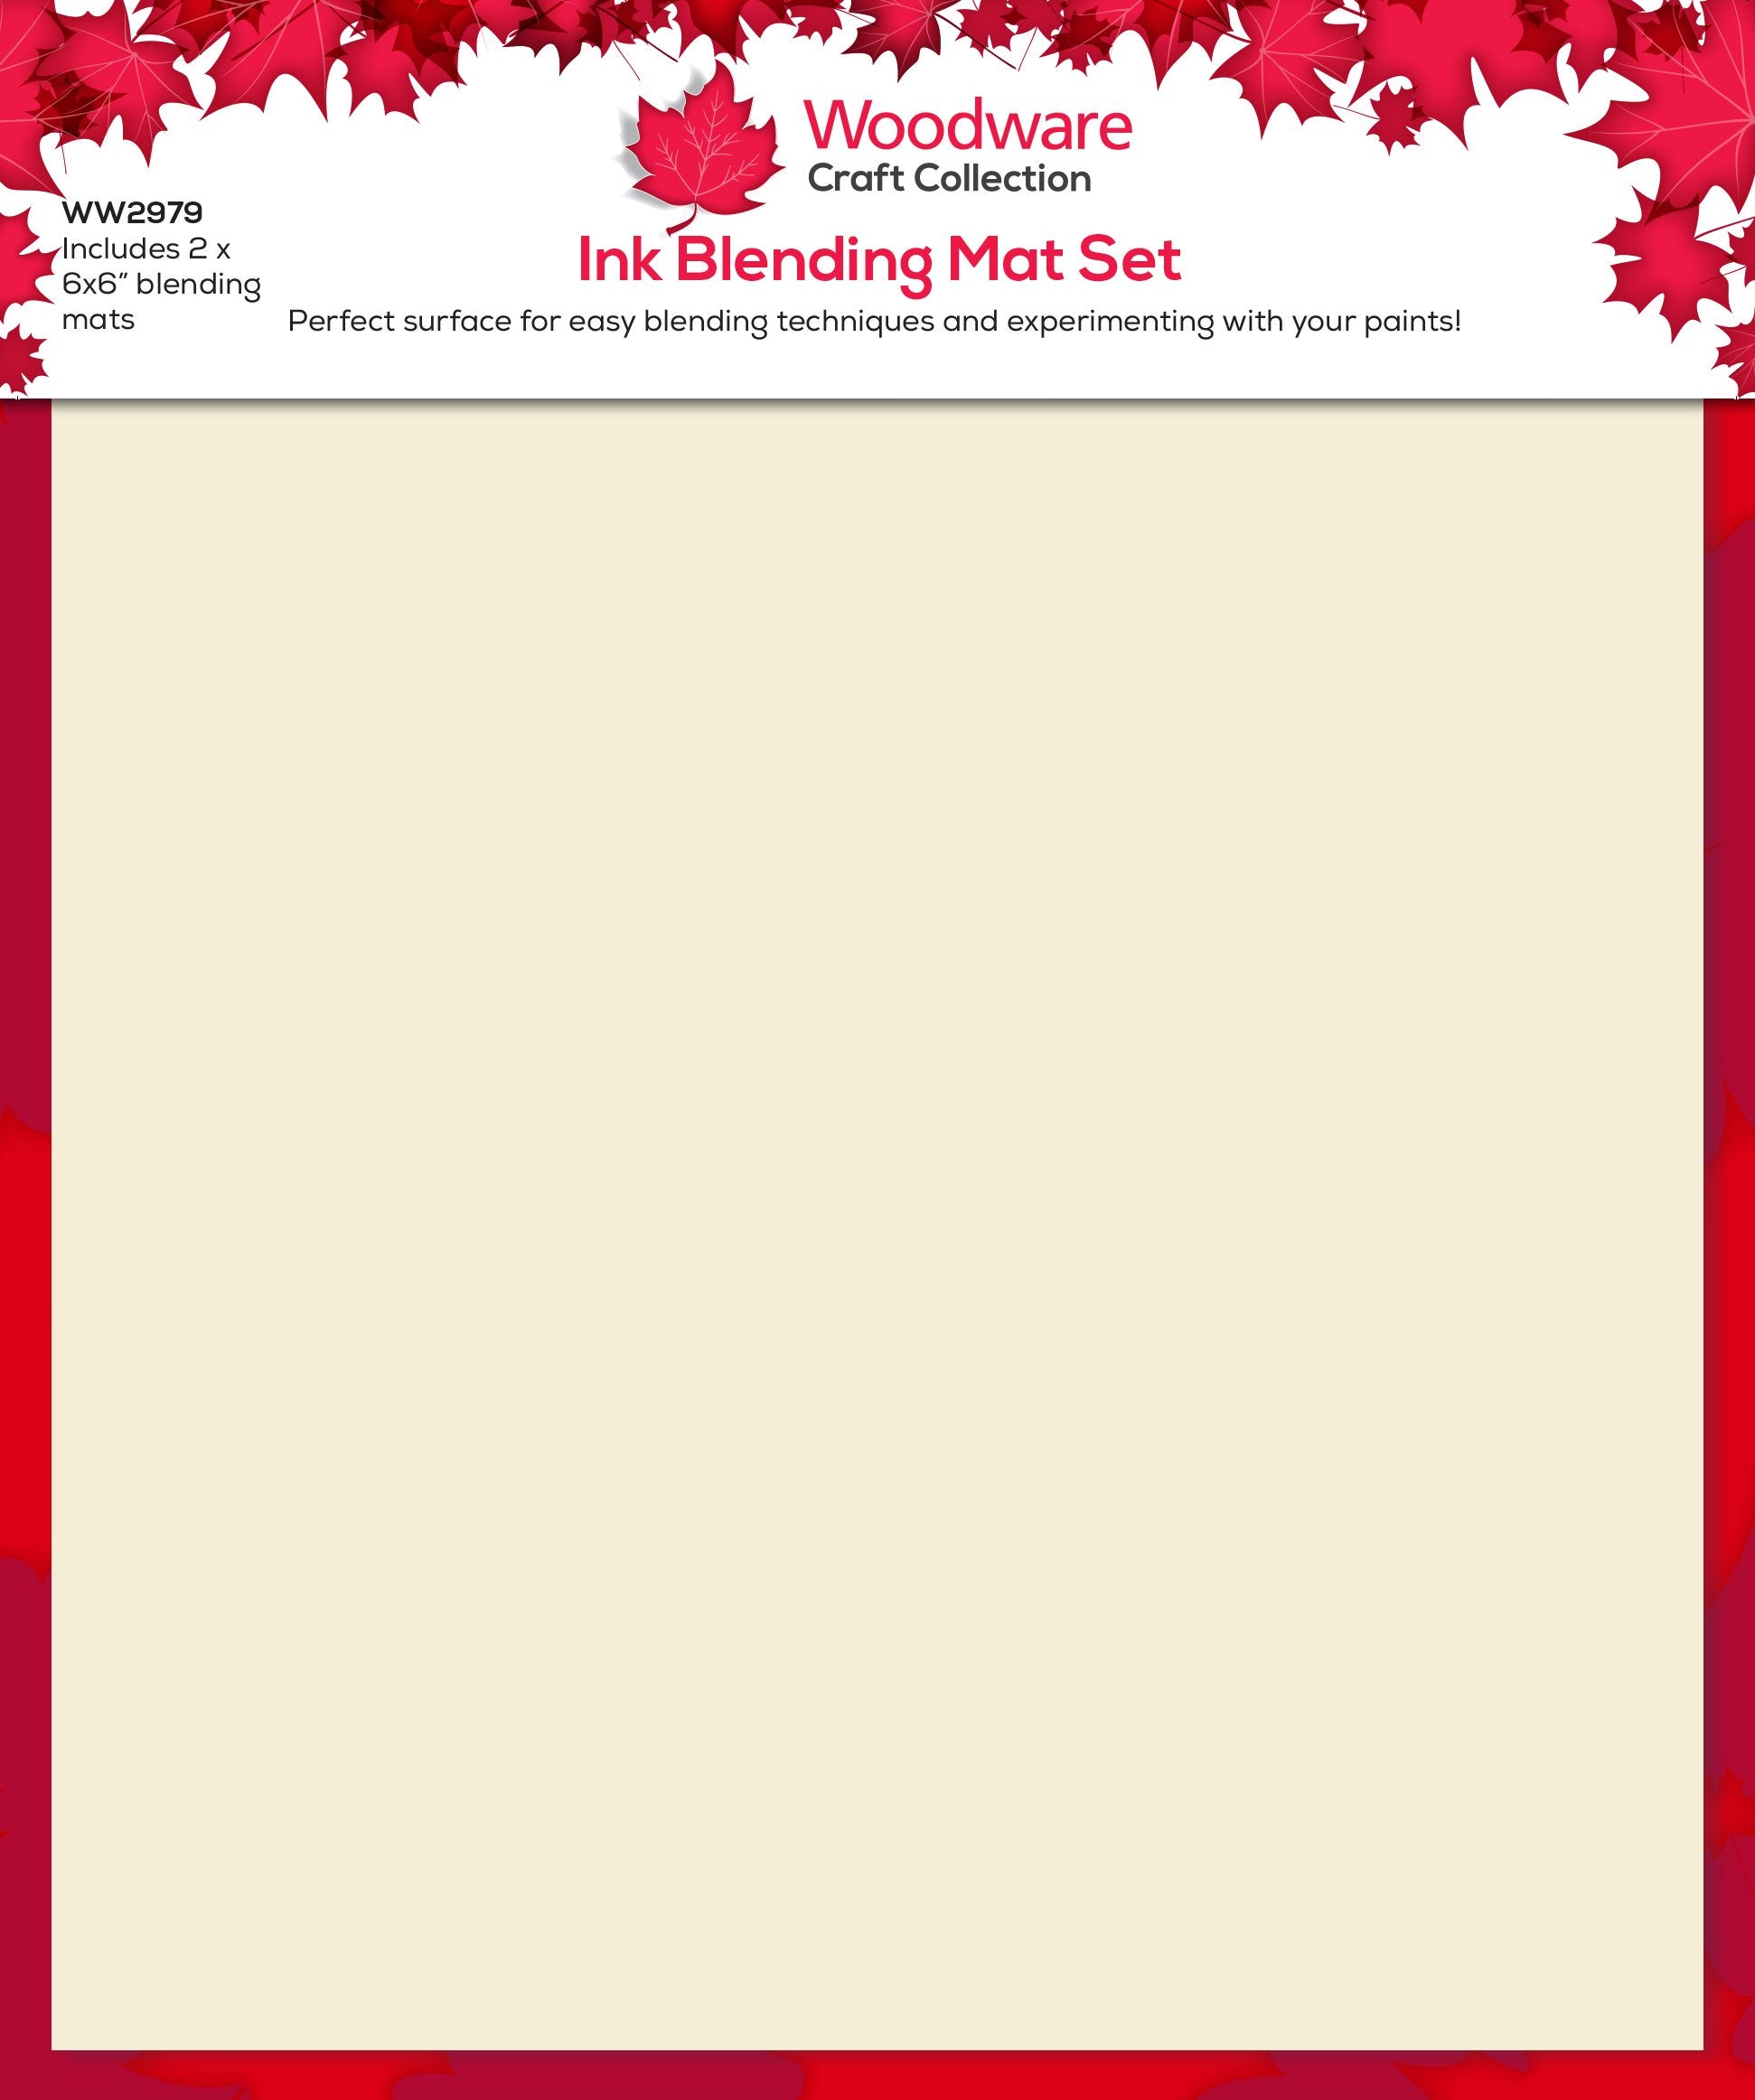 Woodware Ink Blending Mats 2 6 x 6 inches